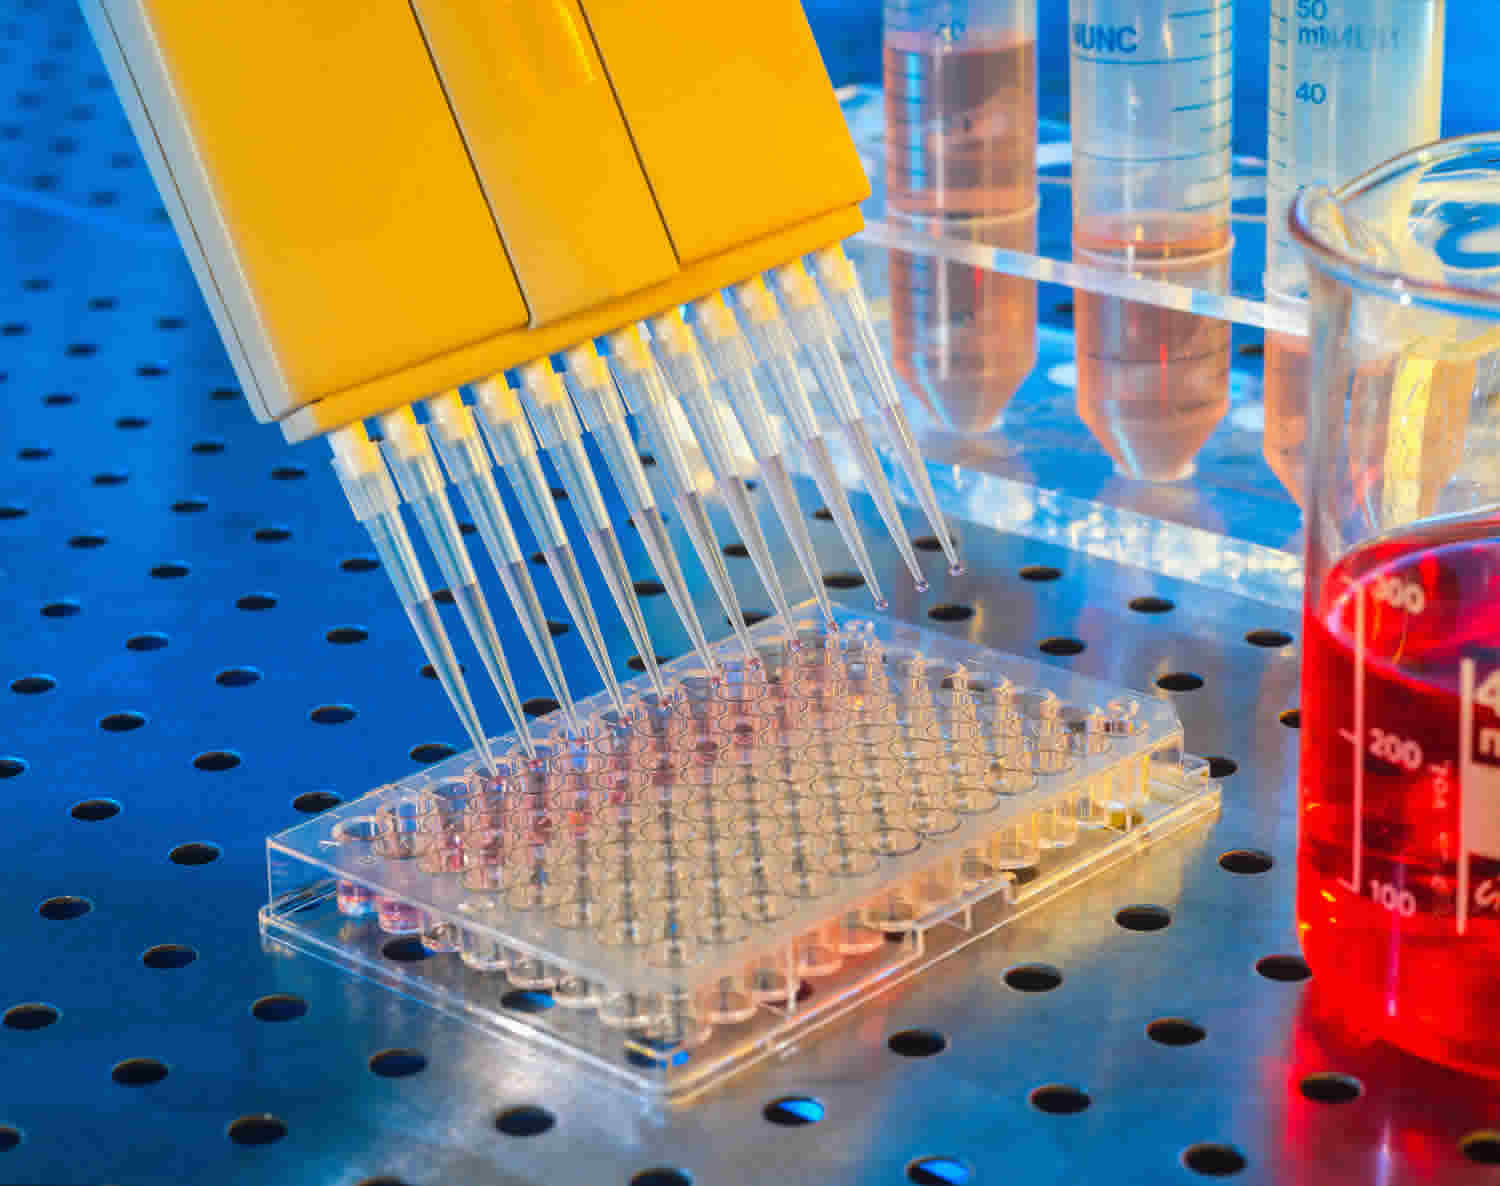 Global Enzyme Linked Immunosorbent Assay Market Is Estimated To Witness High Growth Owing To Rising Demand for Accurate Diagnostic Tests and Technological Advancements